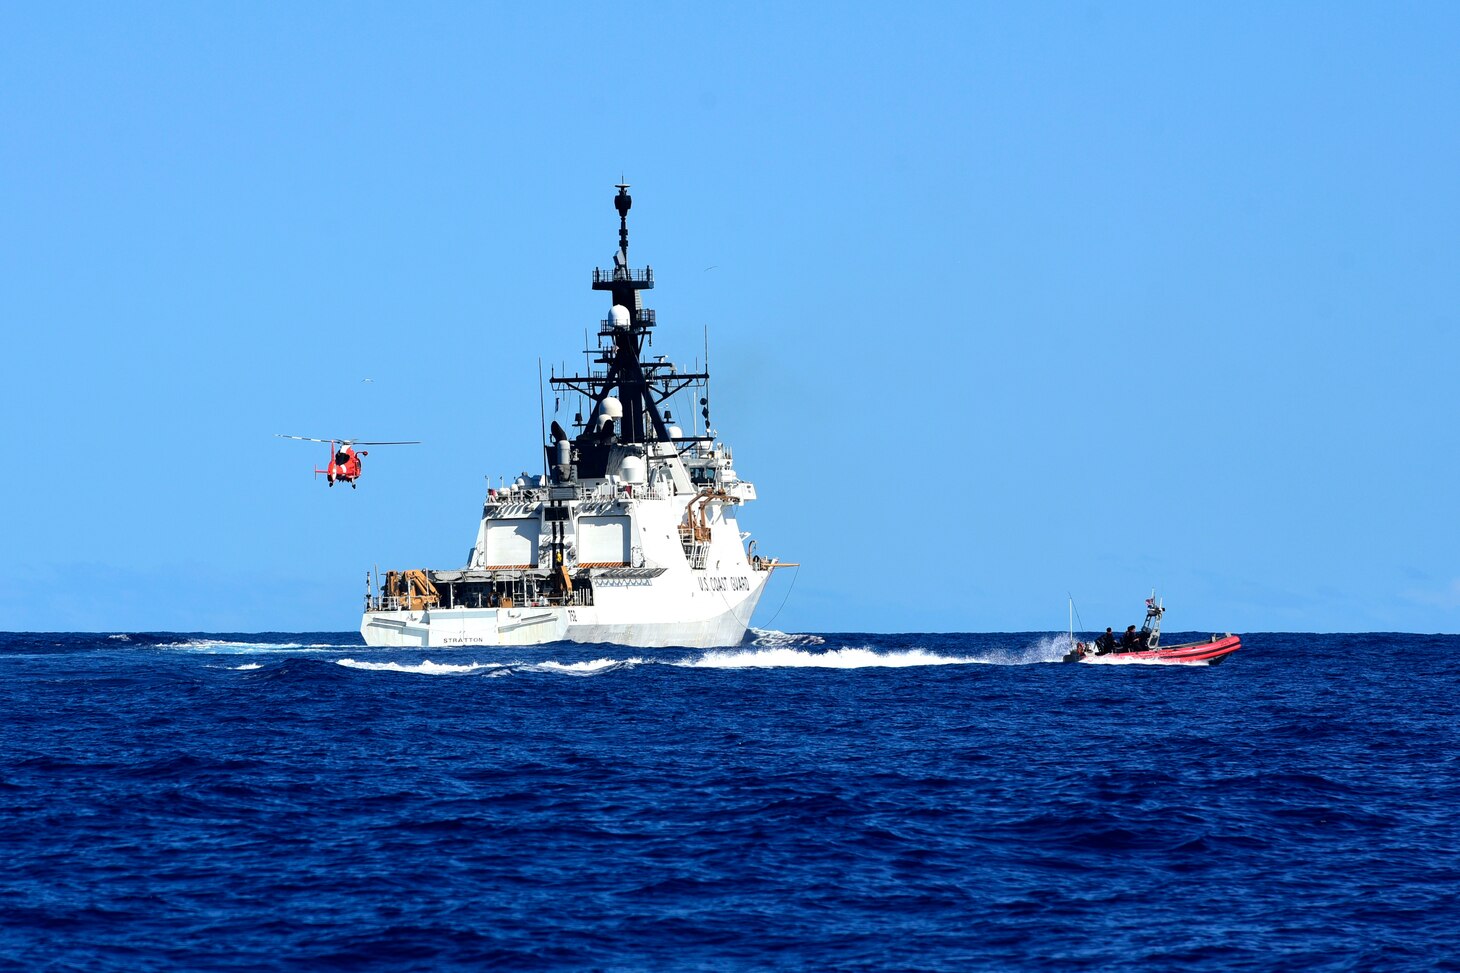 The crew aboard U.S. Coast Guard Cutter Stratton (752) launches multiple air and surface assets during a training operation west of Hawaii, April 20, 2023. Stratton deployed to the Western Pacific to conduct collaborative engagements with ally and partner nations in the region, promoting a free and open Indo-Pacific.